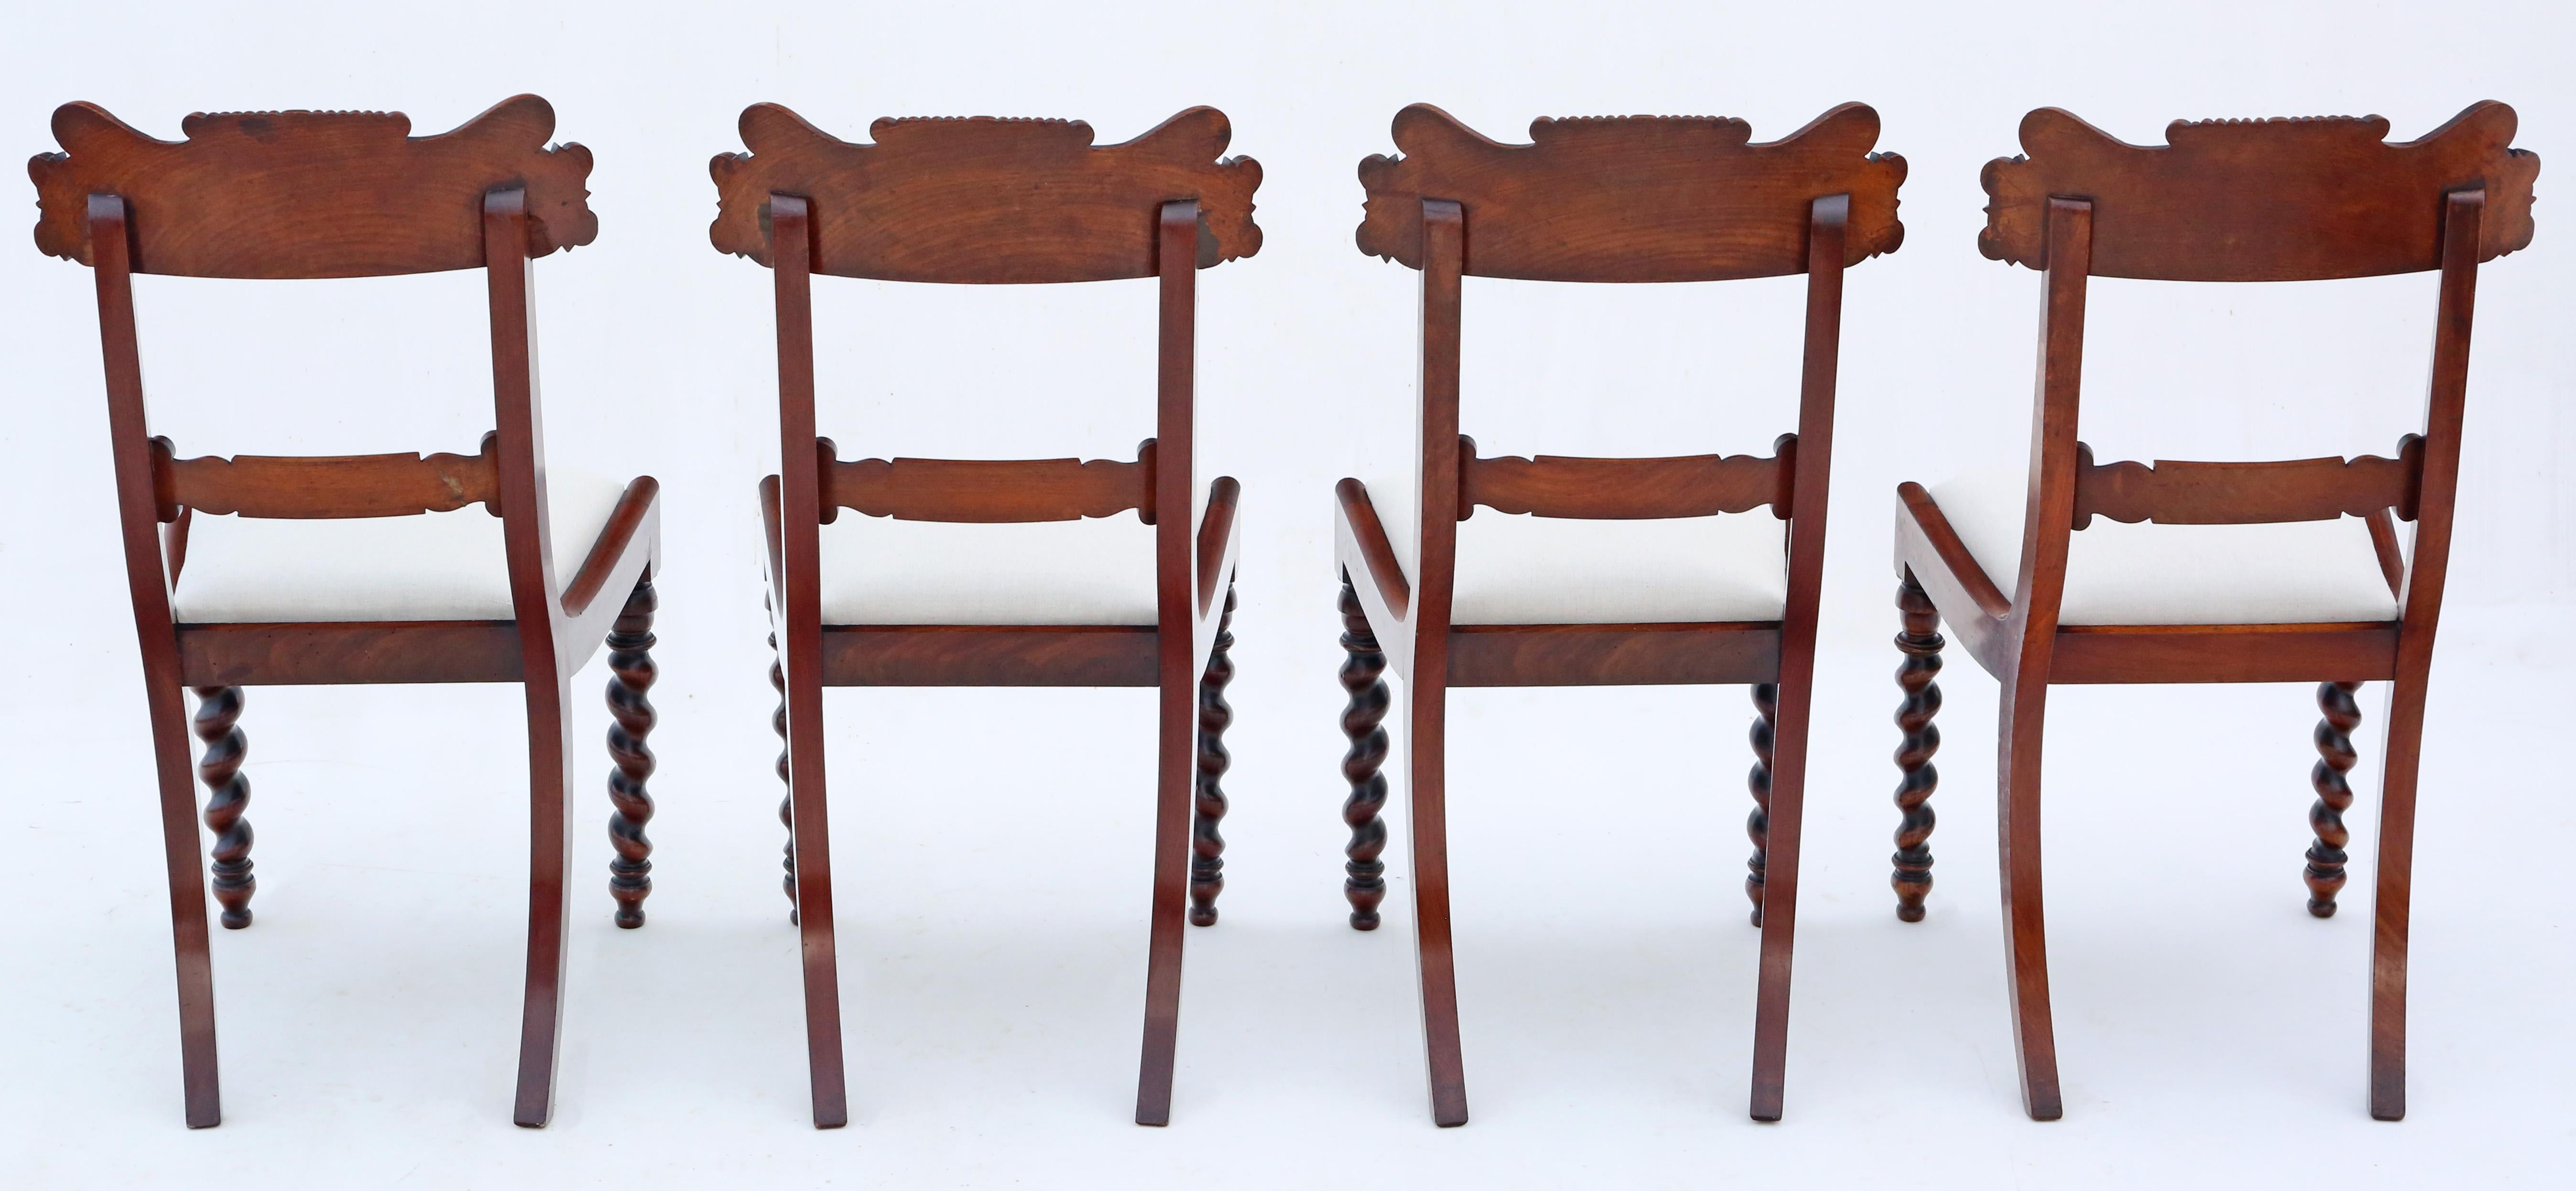 Antique fine quality set of 4 Regency / William IV mahogany dining chairs C1830 In Good Condition For Sale In Wisbech, Cambridgeshire